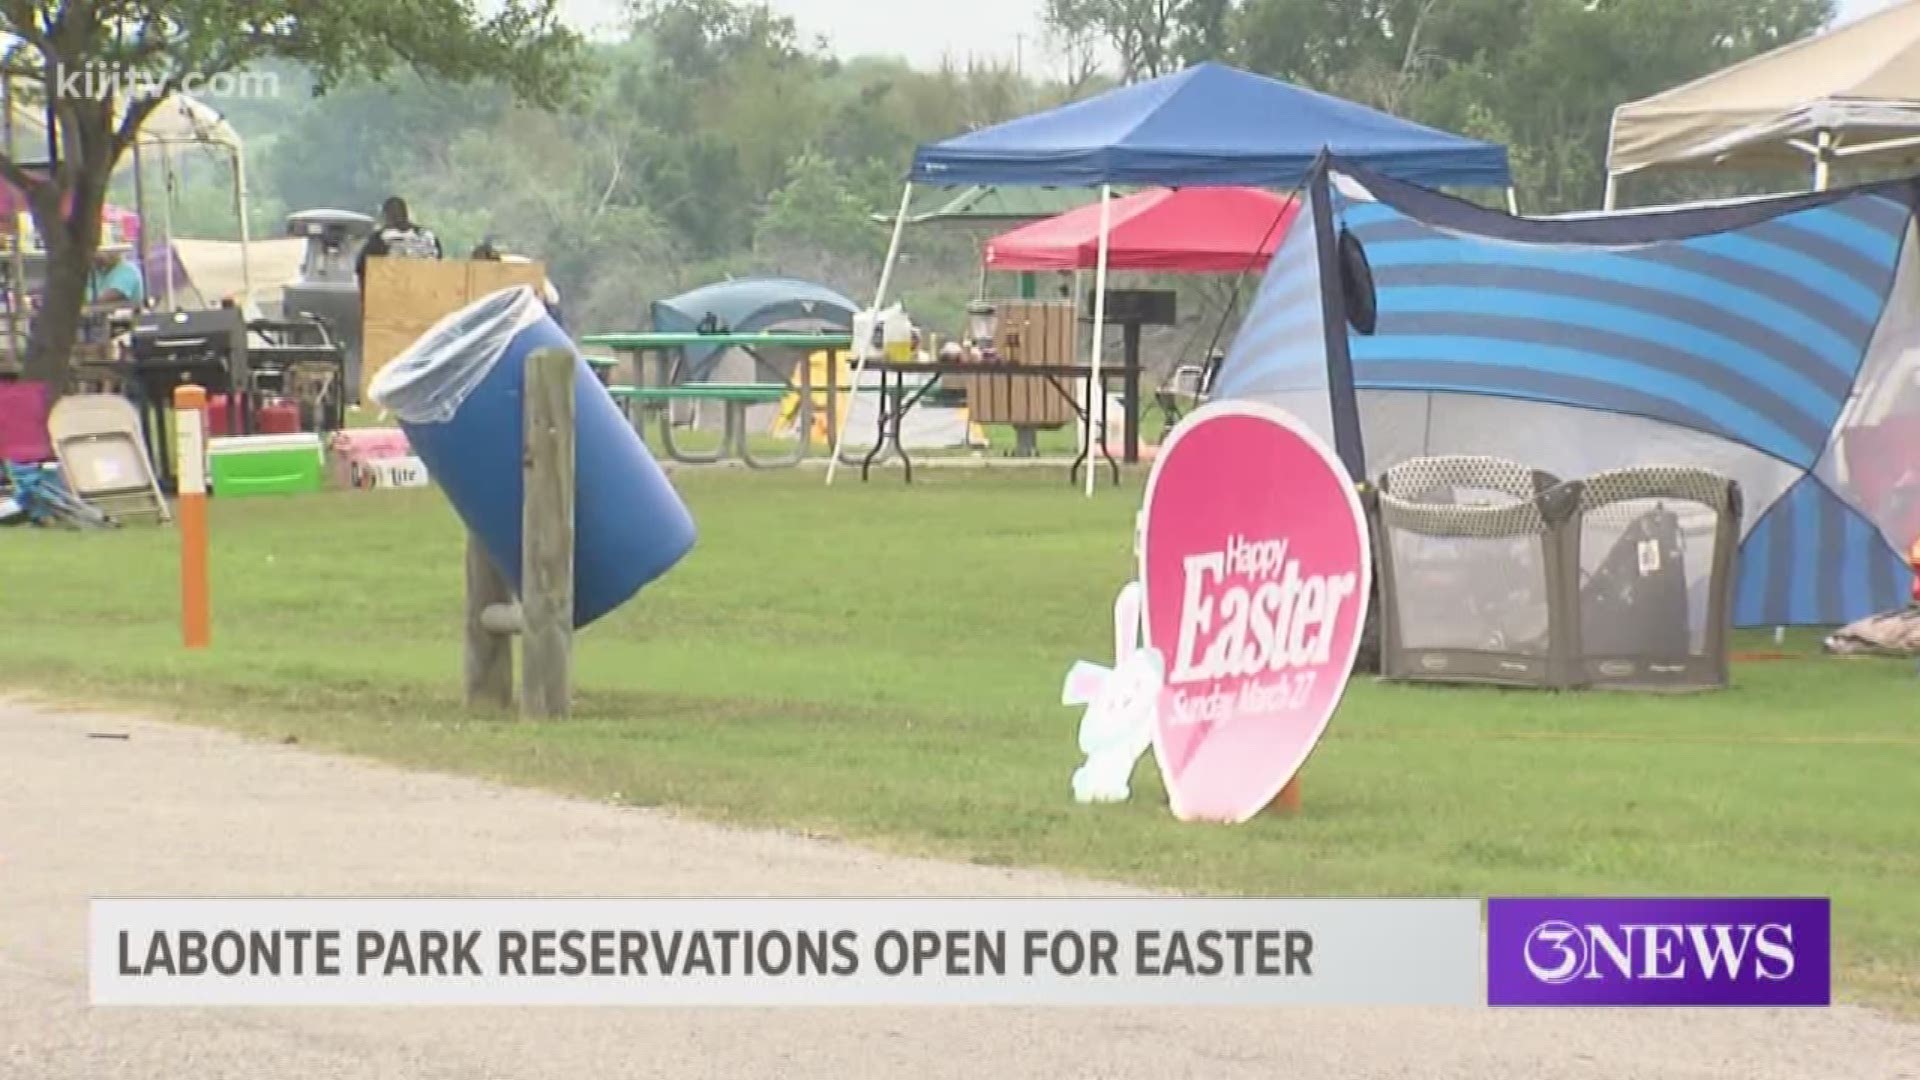 The City of Corpus Christi taking reservations for Easter weekend camping at Labonte Park, an annual tradition for many in the Coastal Bend.